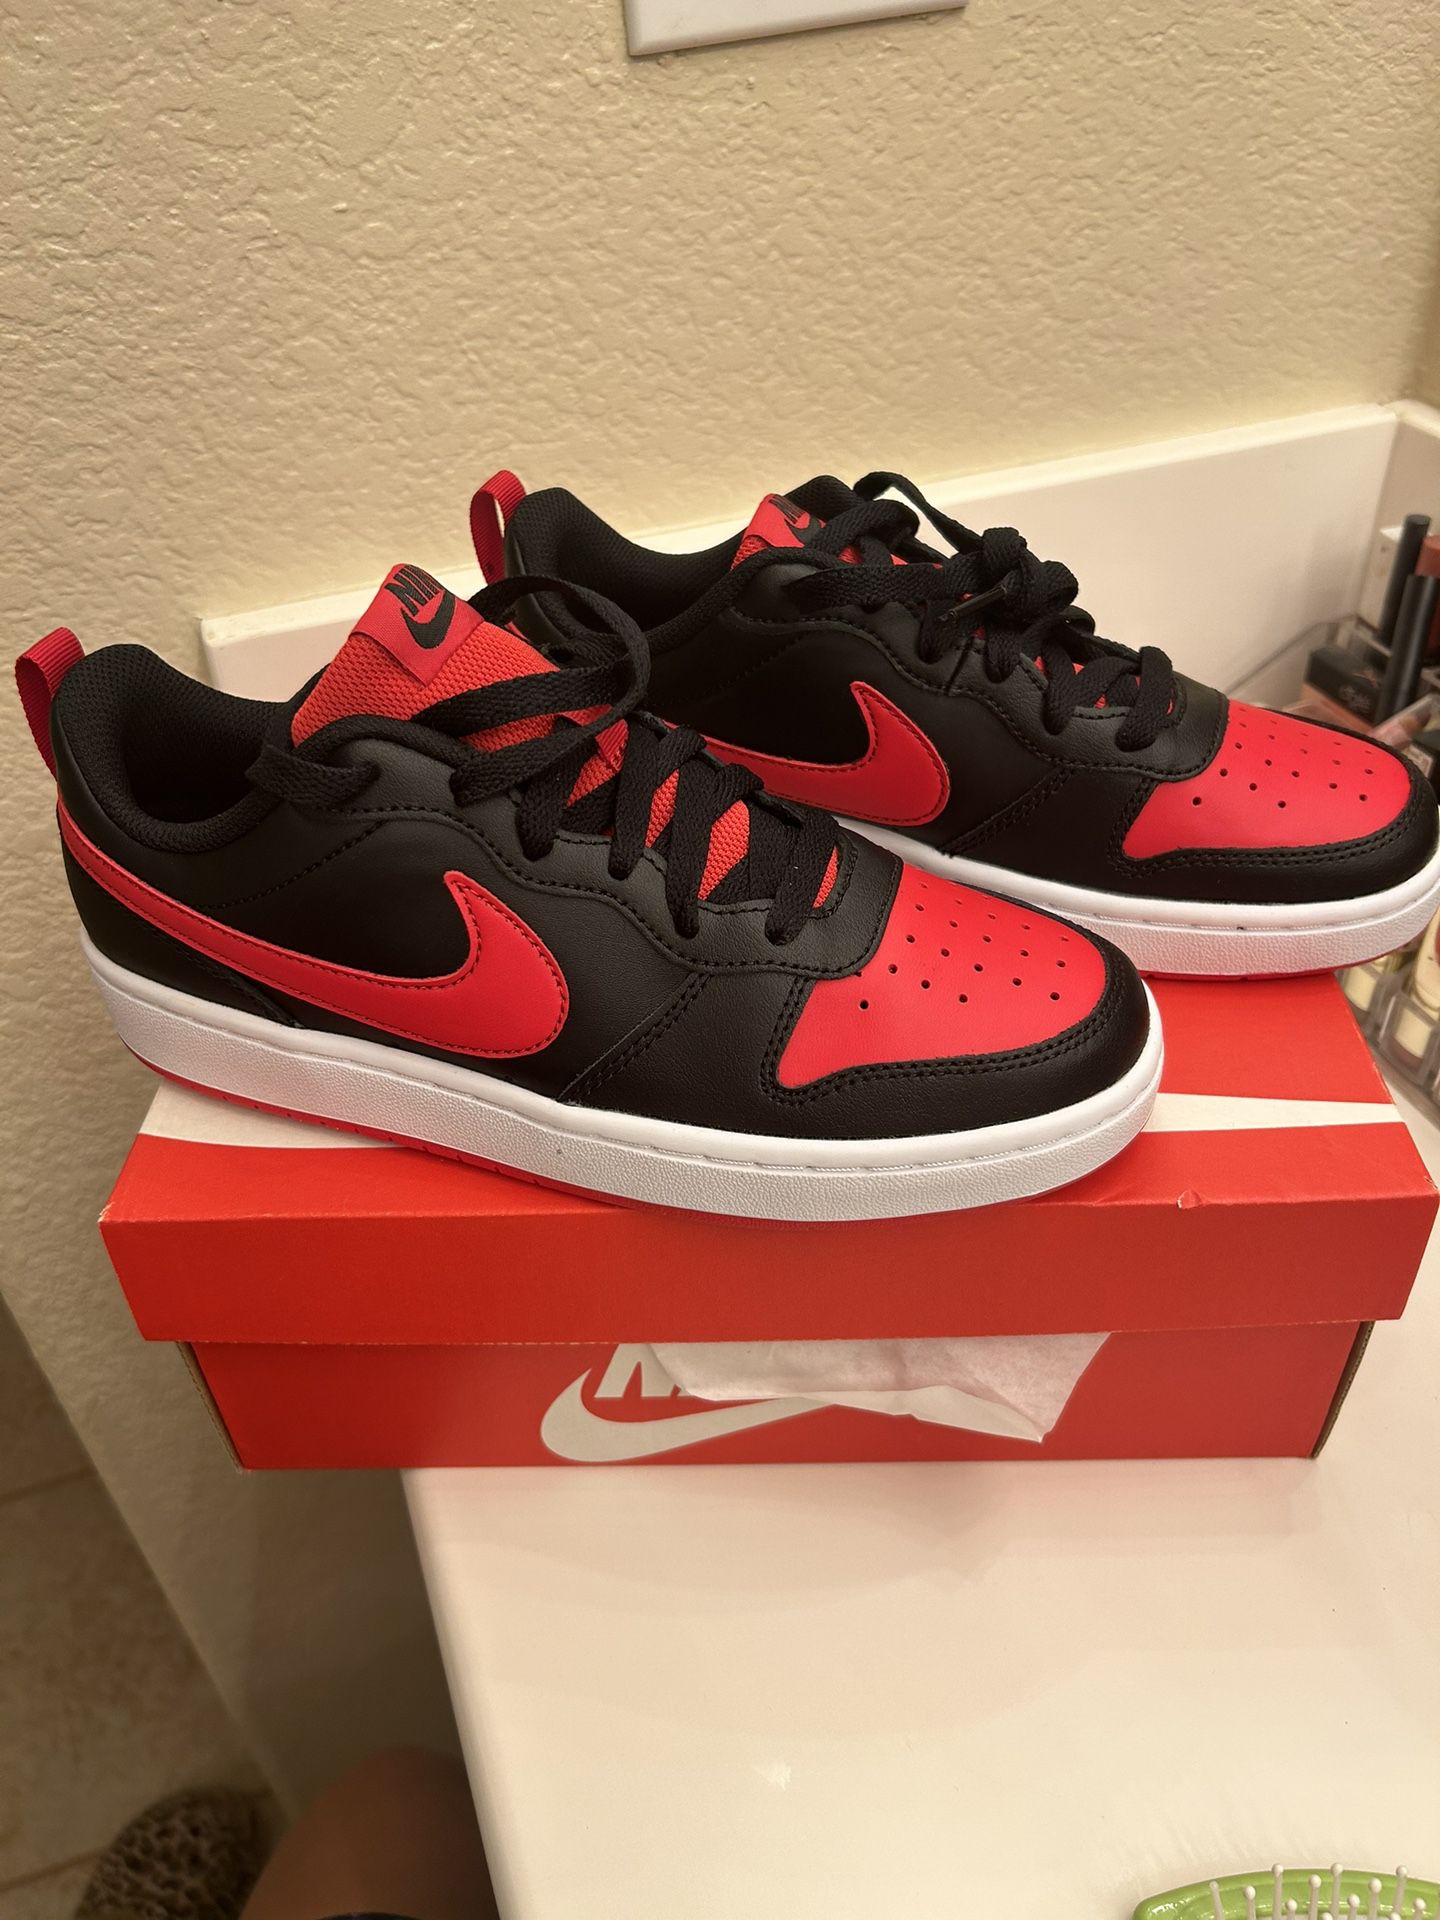 Red And Black Nike Shoes 